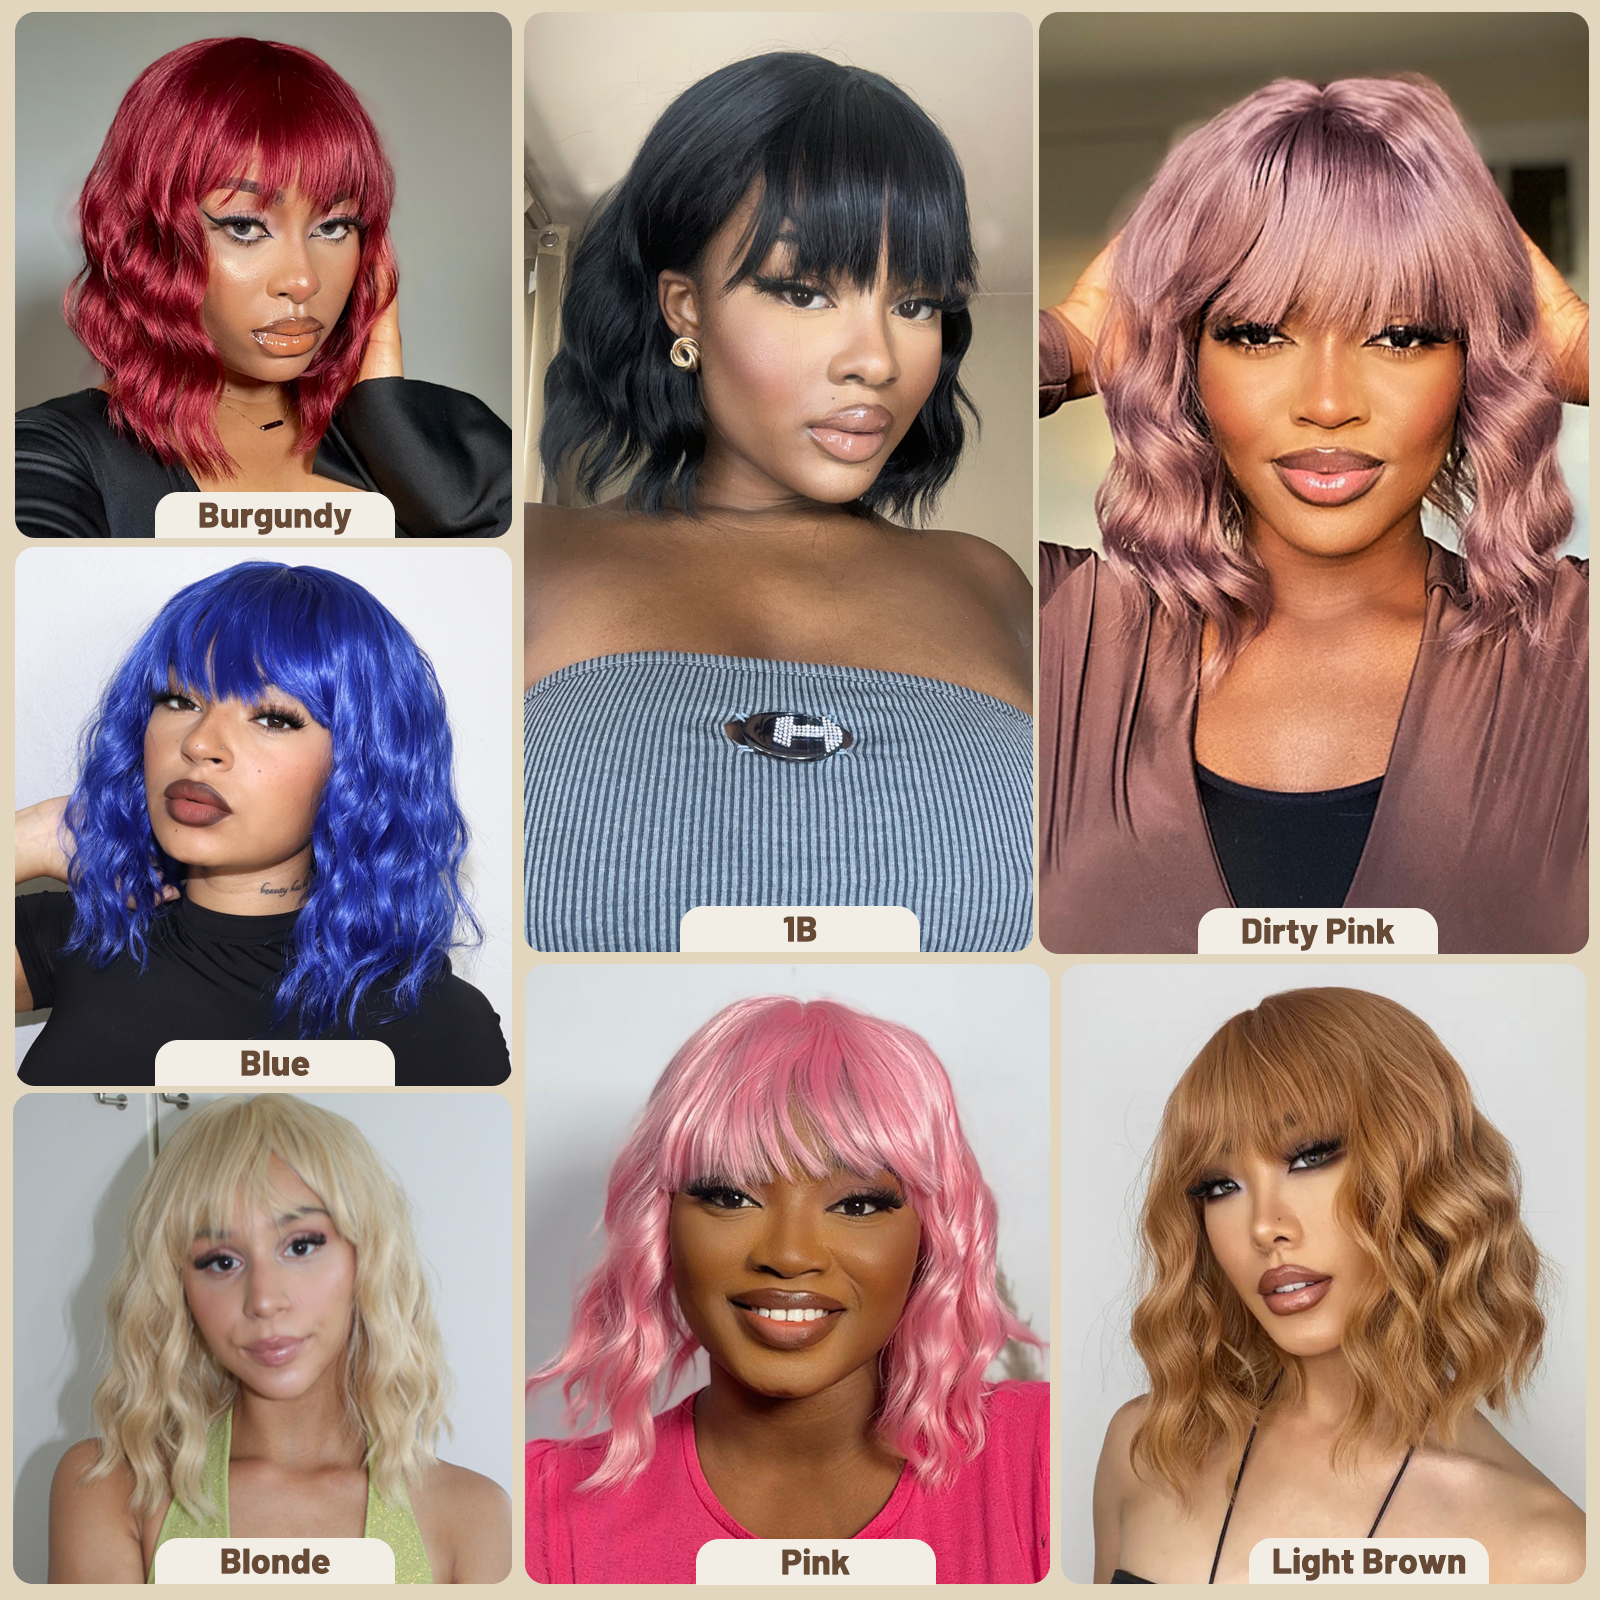 𝗣𝘂𝗺𝗽𝗸𝗶𝗻 𝗦𝗽𝗶𝗰𝗲 𝗧𝗿𝗲𝘀𝘀𝗲𝘀 | TOYOTRESS Pink Paradise LOOSE WAVY SHORT BOB WIGS HD LACE PART WITH BANGS - 12 INCH NATURAL BLACK BOB HAIR WIGS FOR BLACK WOMEN, SHOULDER LENGTH CURLY SYNTHETIC WIGS(LF0926)